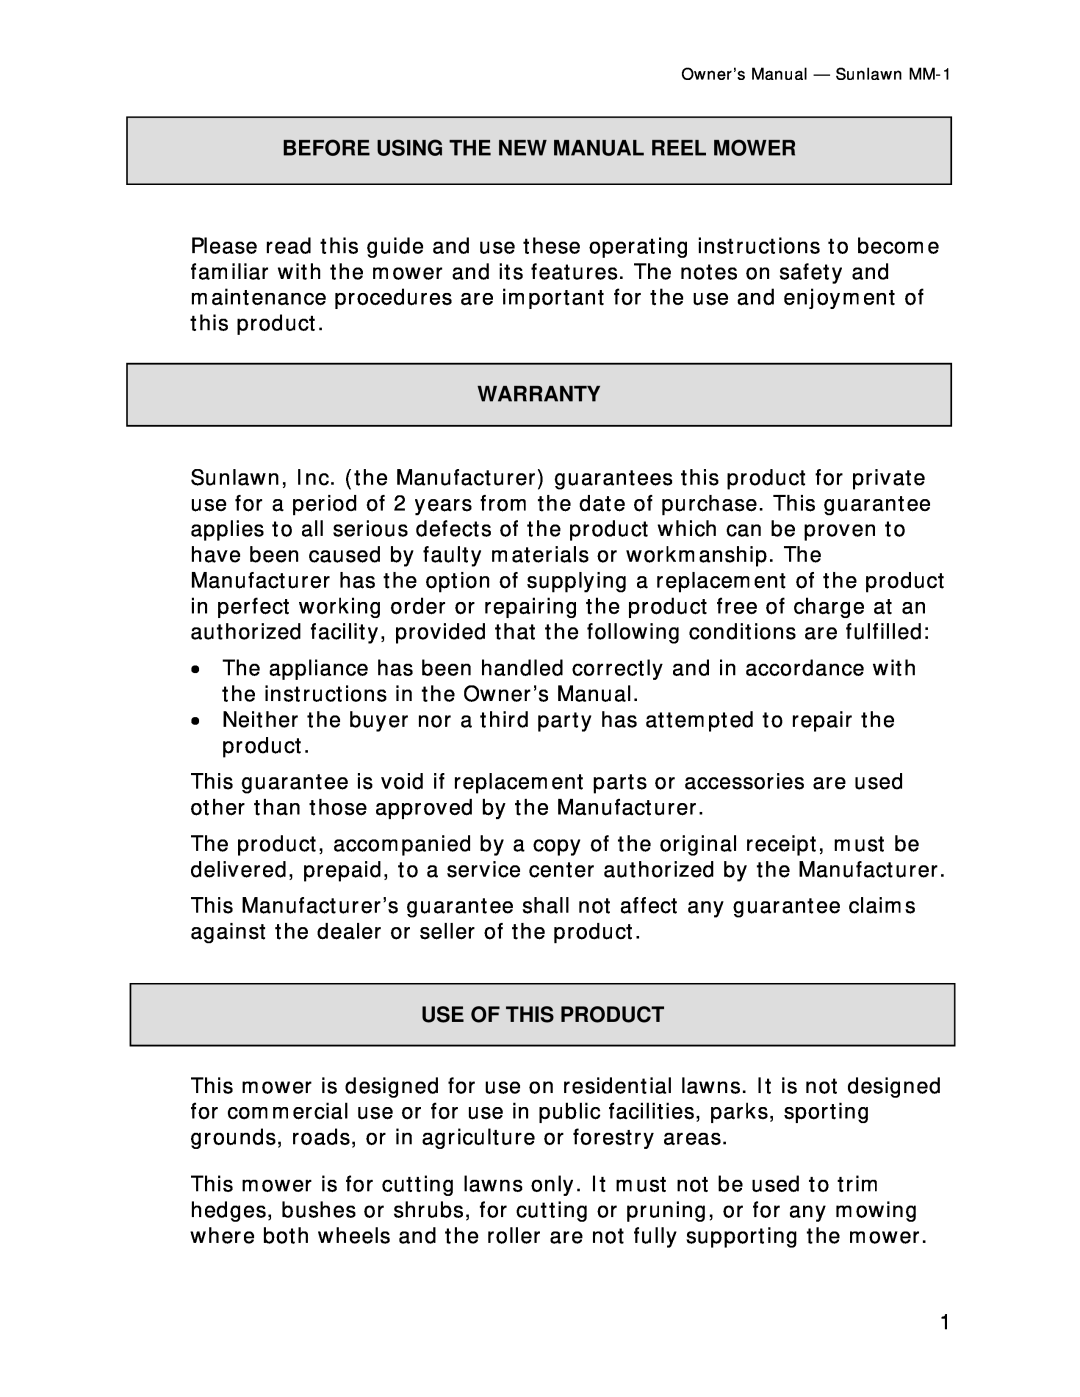 Reel Mowers, Etc MM-1 owner manual Before Using The New Manual Reel Mower, Warranty, Use Of This Product 